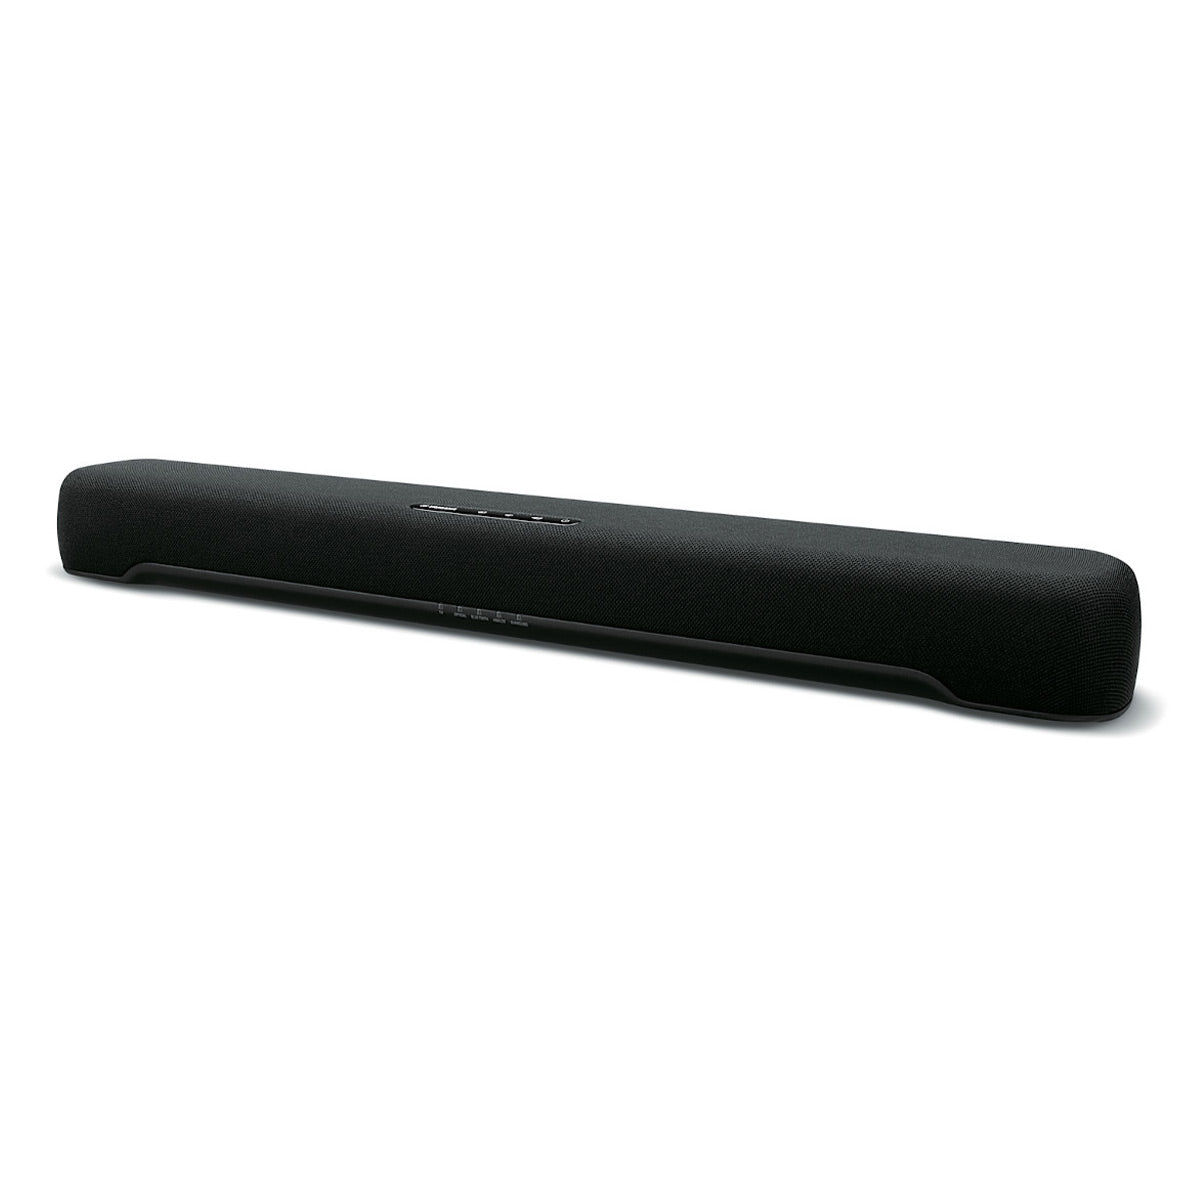 Yamaha SR-C20A Compact Sound Bar with Built-In Subwoofer and Bluetooth (Factory Certified Refurbished)